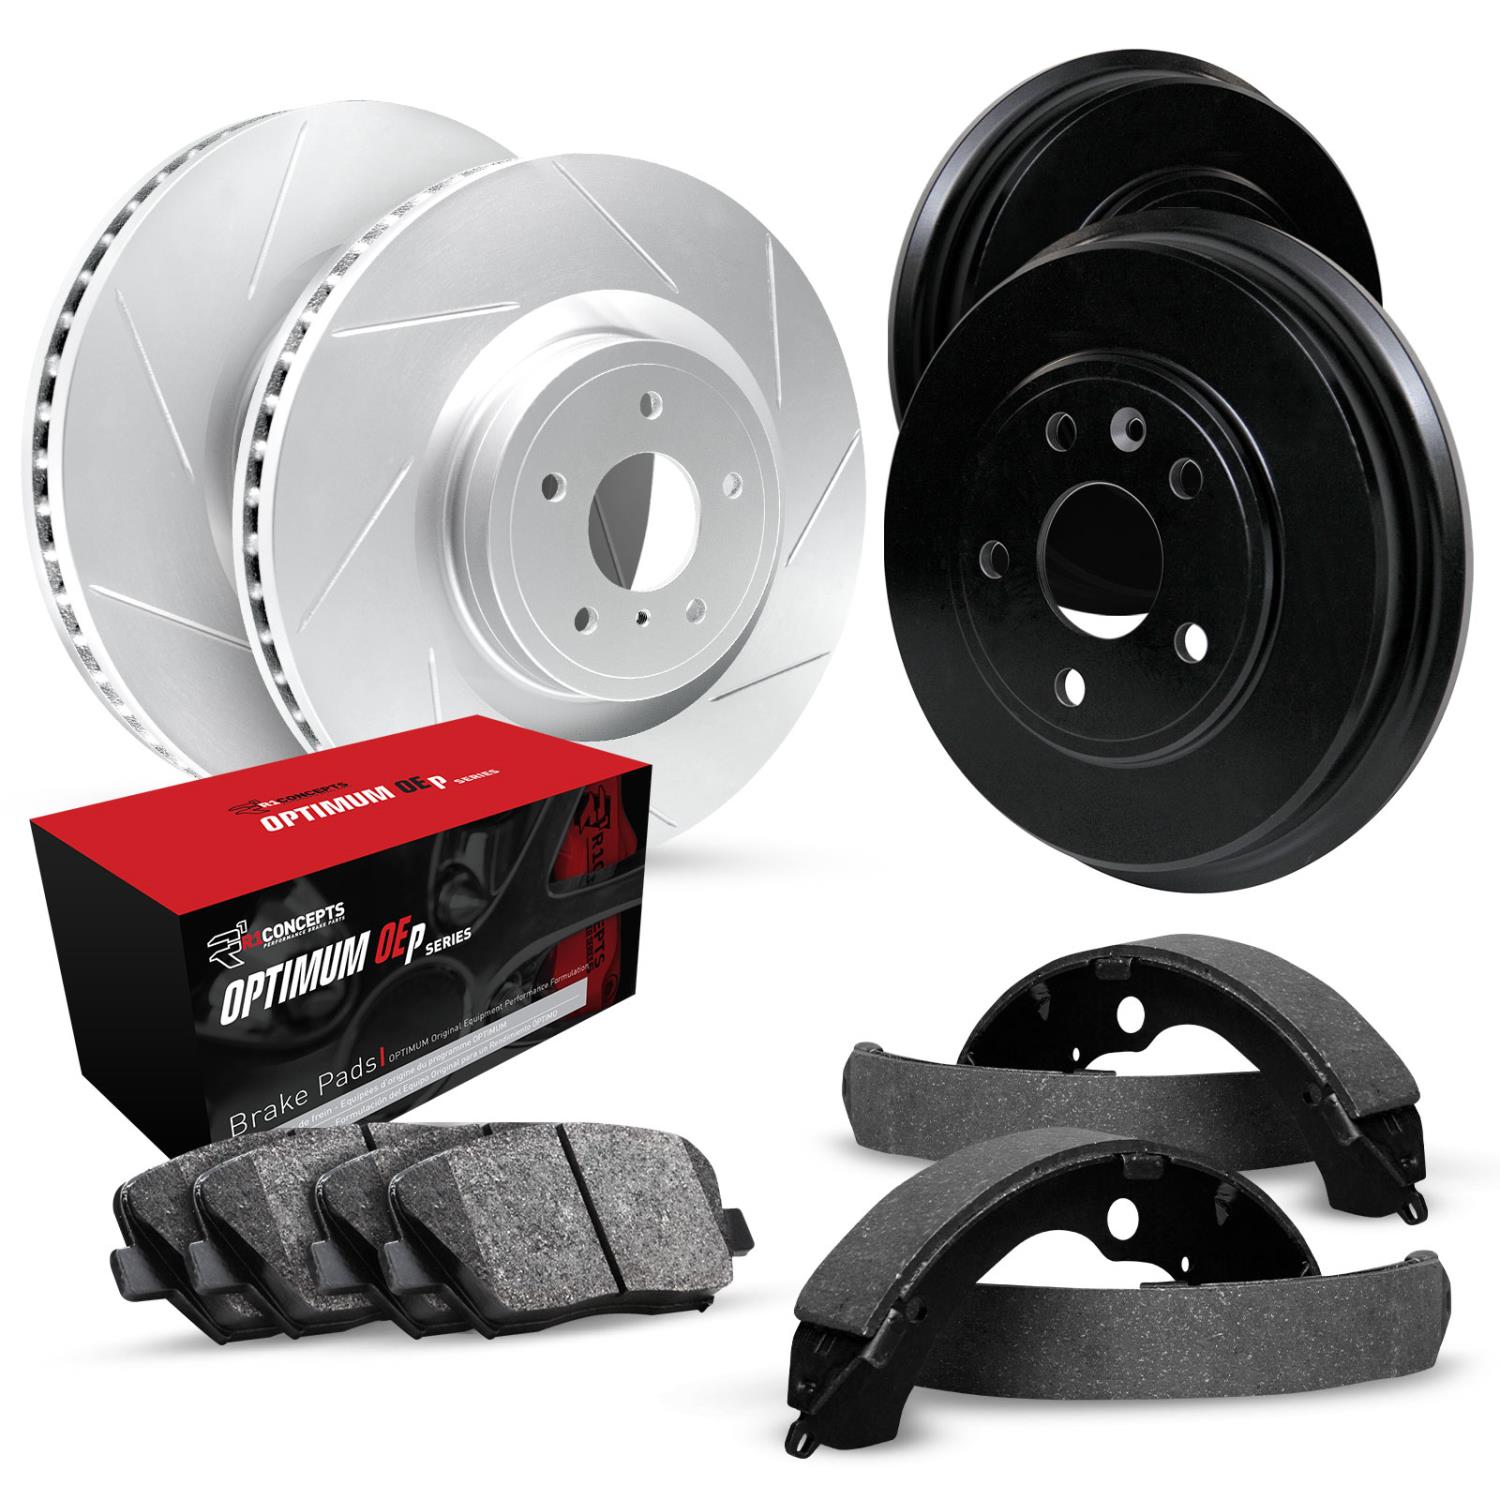 GEO-Carbon Slotted Brake Rotor & Drum Set w/Optimum OE Pads & Shoes, 1990-1997 Acura/Honda, Position: Front & Rear